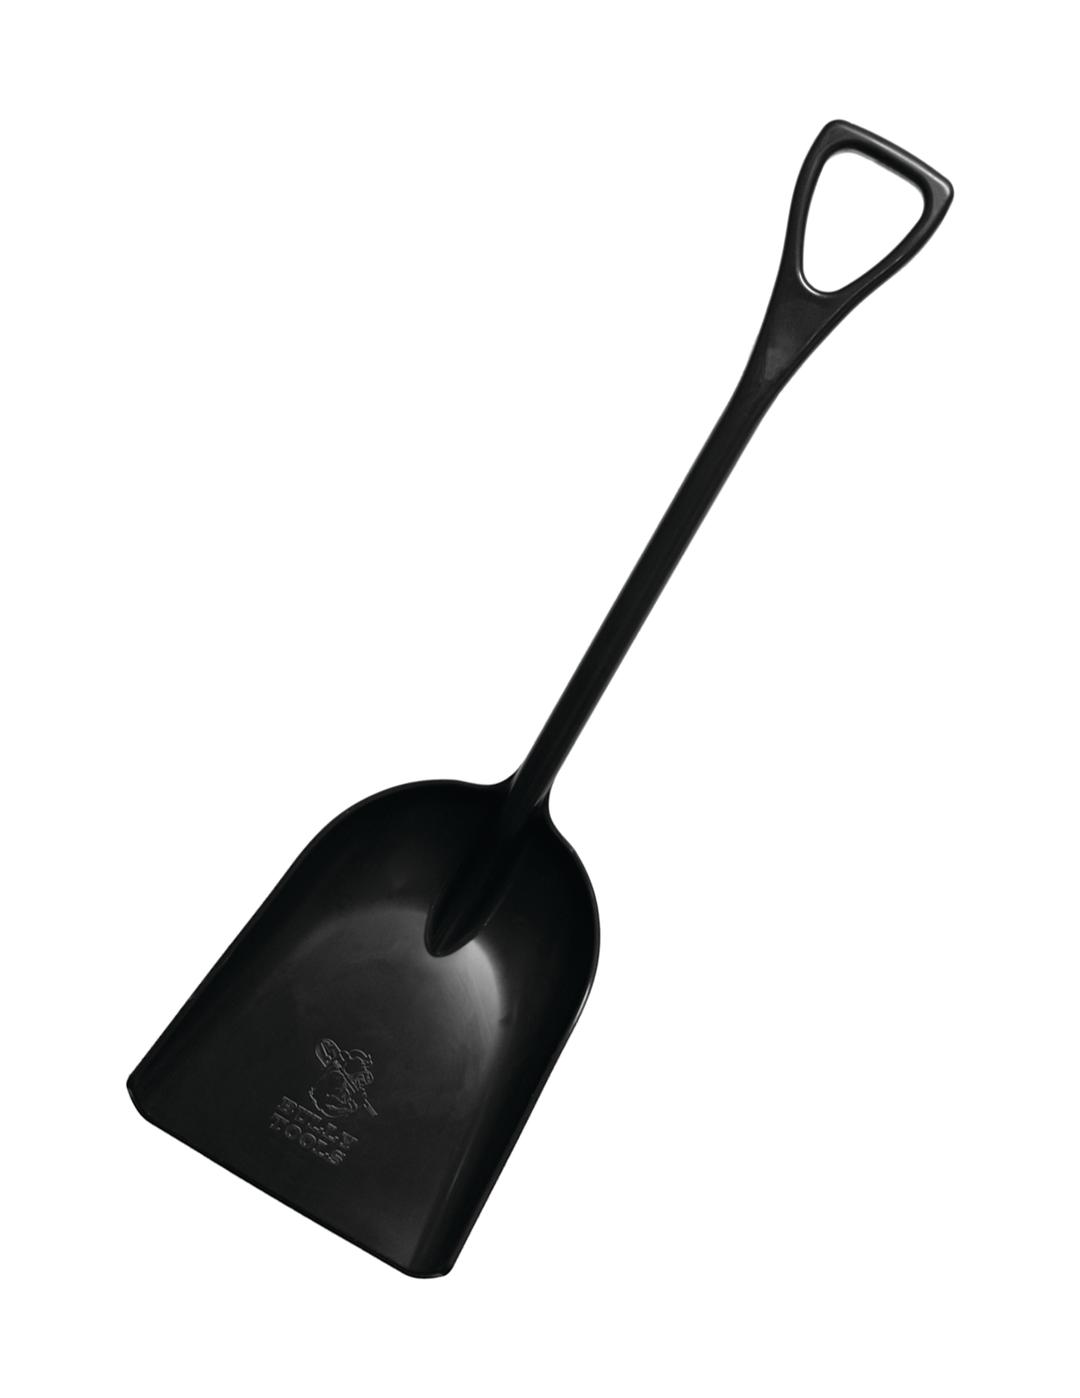 Bully Tools 42" OnePiece Poly Scoop with Dgrip Handle - 92801